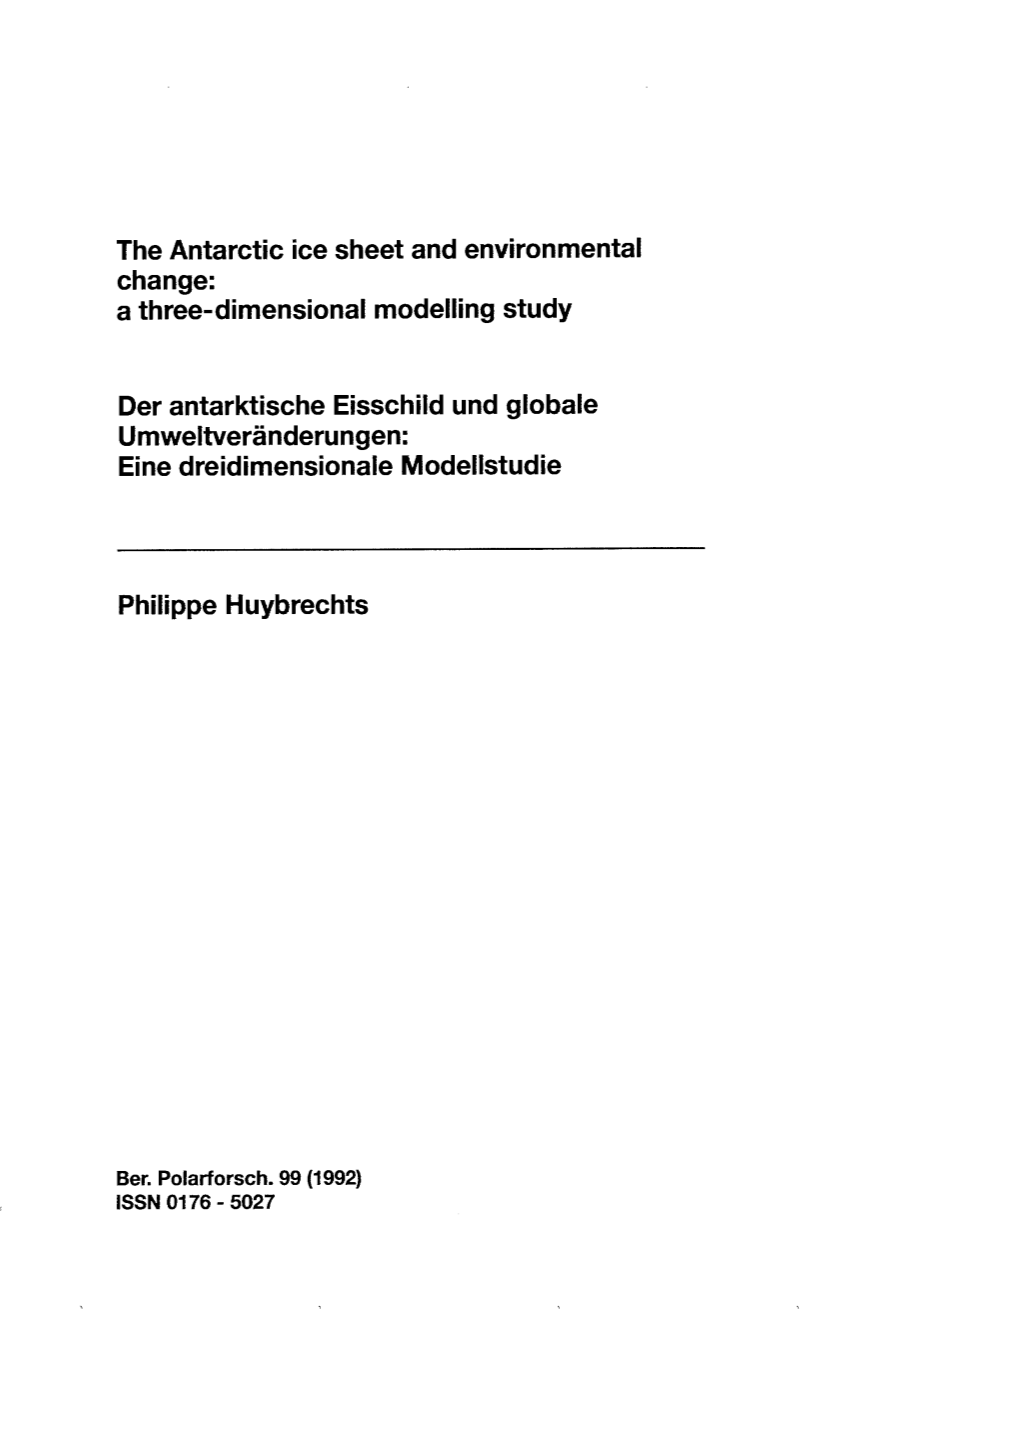 The Antarctic Ice Sheet and Environmental Change: a Three-Dimensional Modelling Study